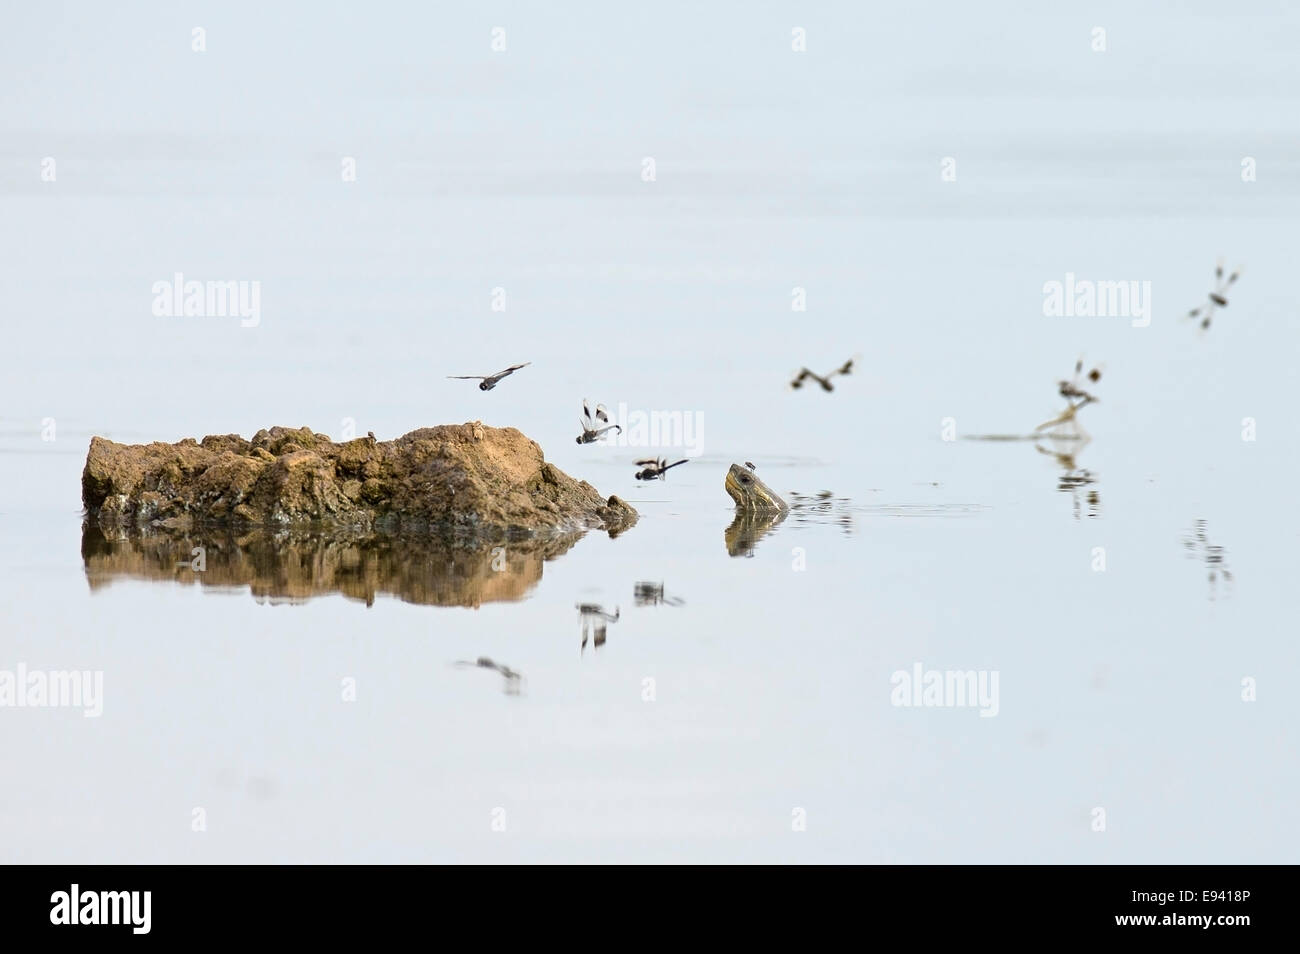 Banded Groundling dragonfly (Brachythemis leucosticta) hovering over water with a head of a softshell turtle (Trionyx triunguis) Stock Photo